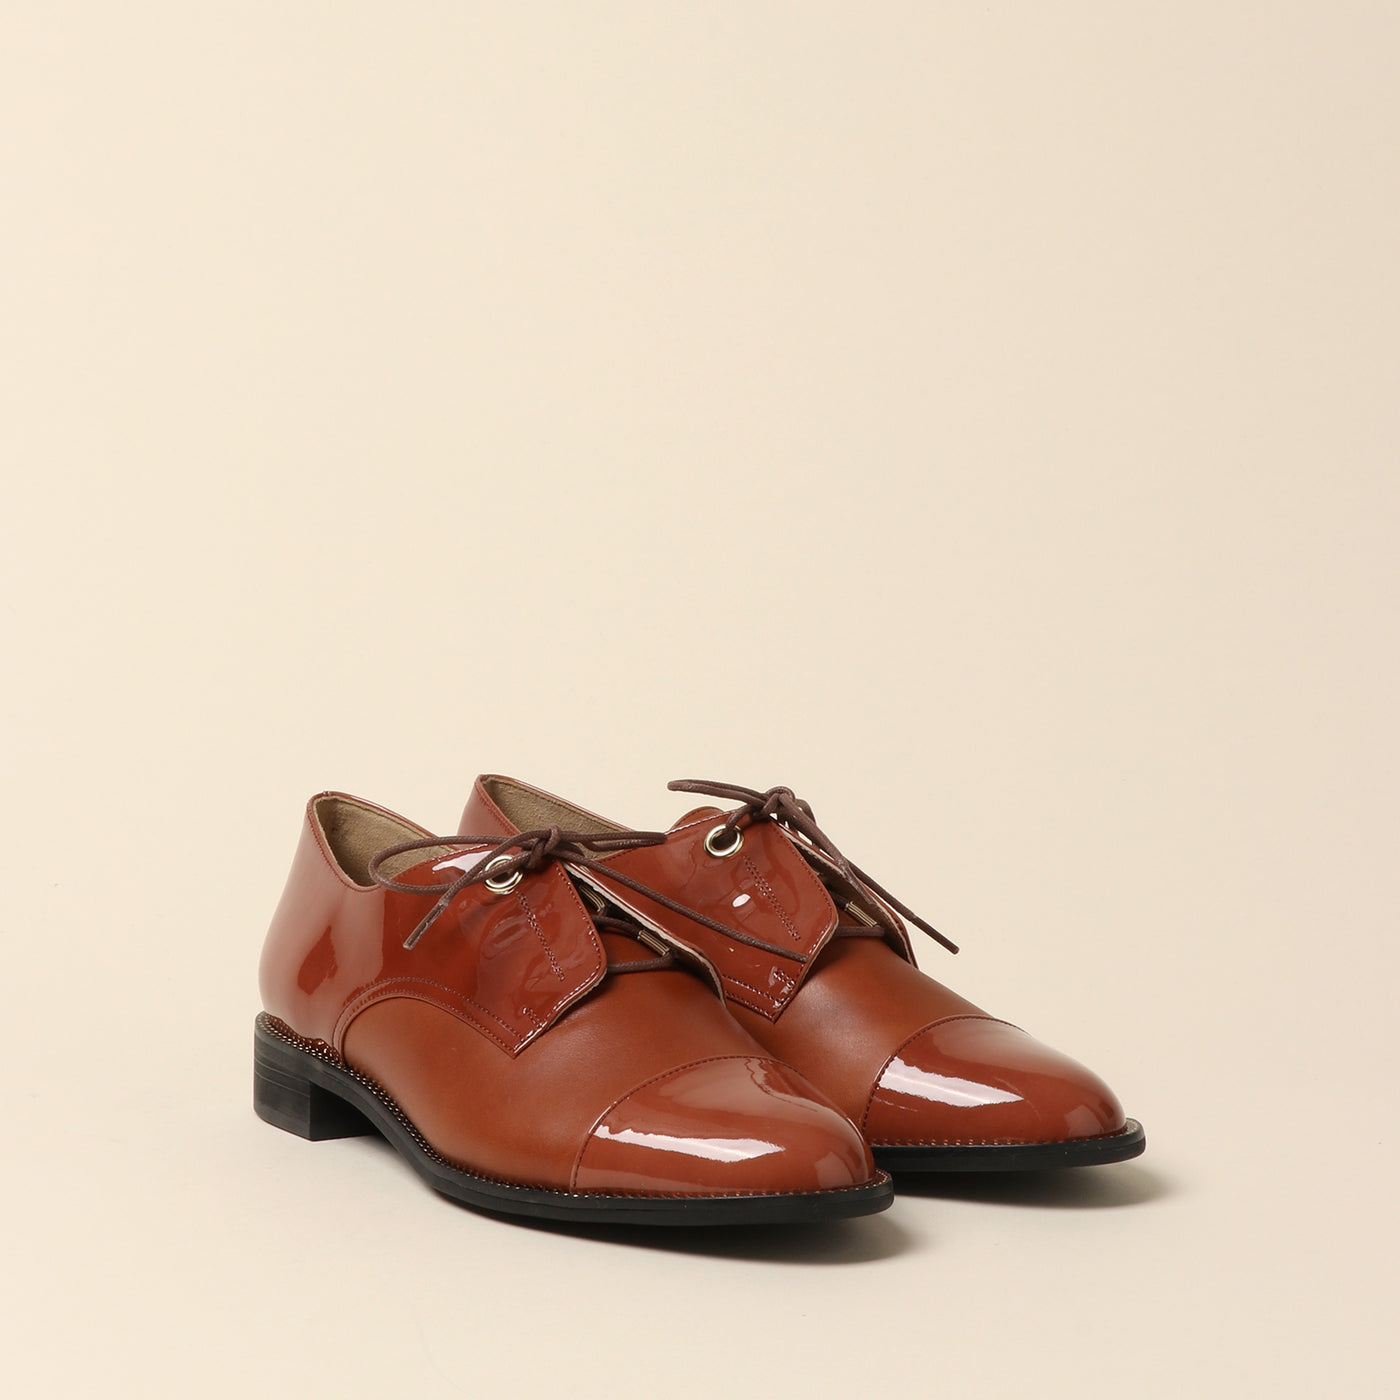 ＜Madras lace-up casual shoes with black enamel